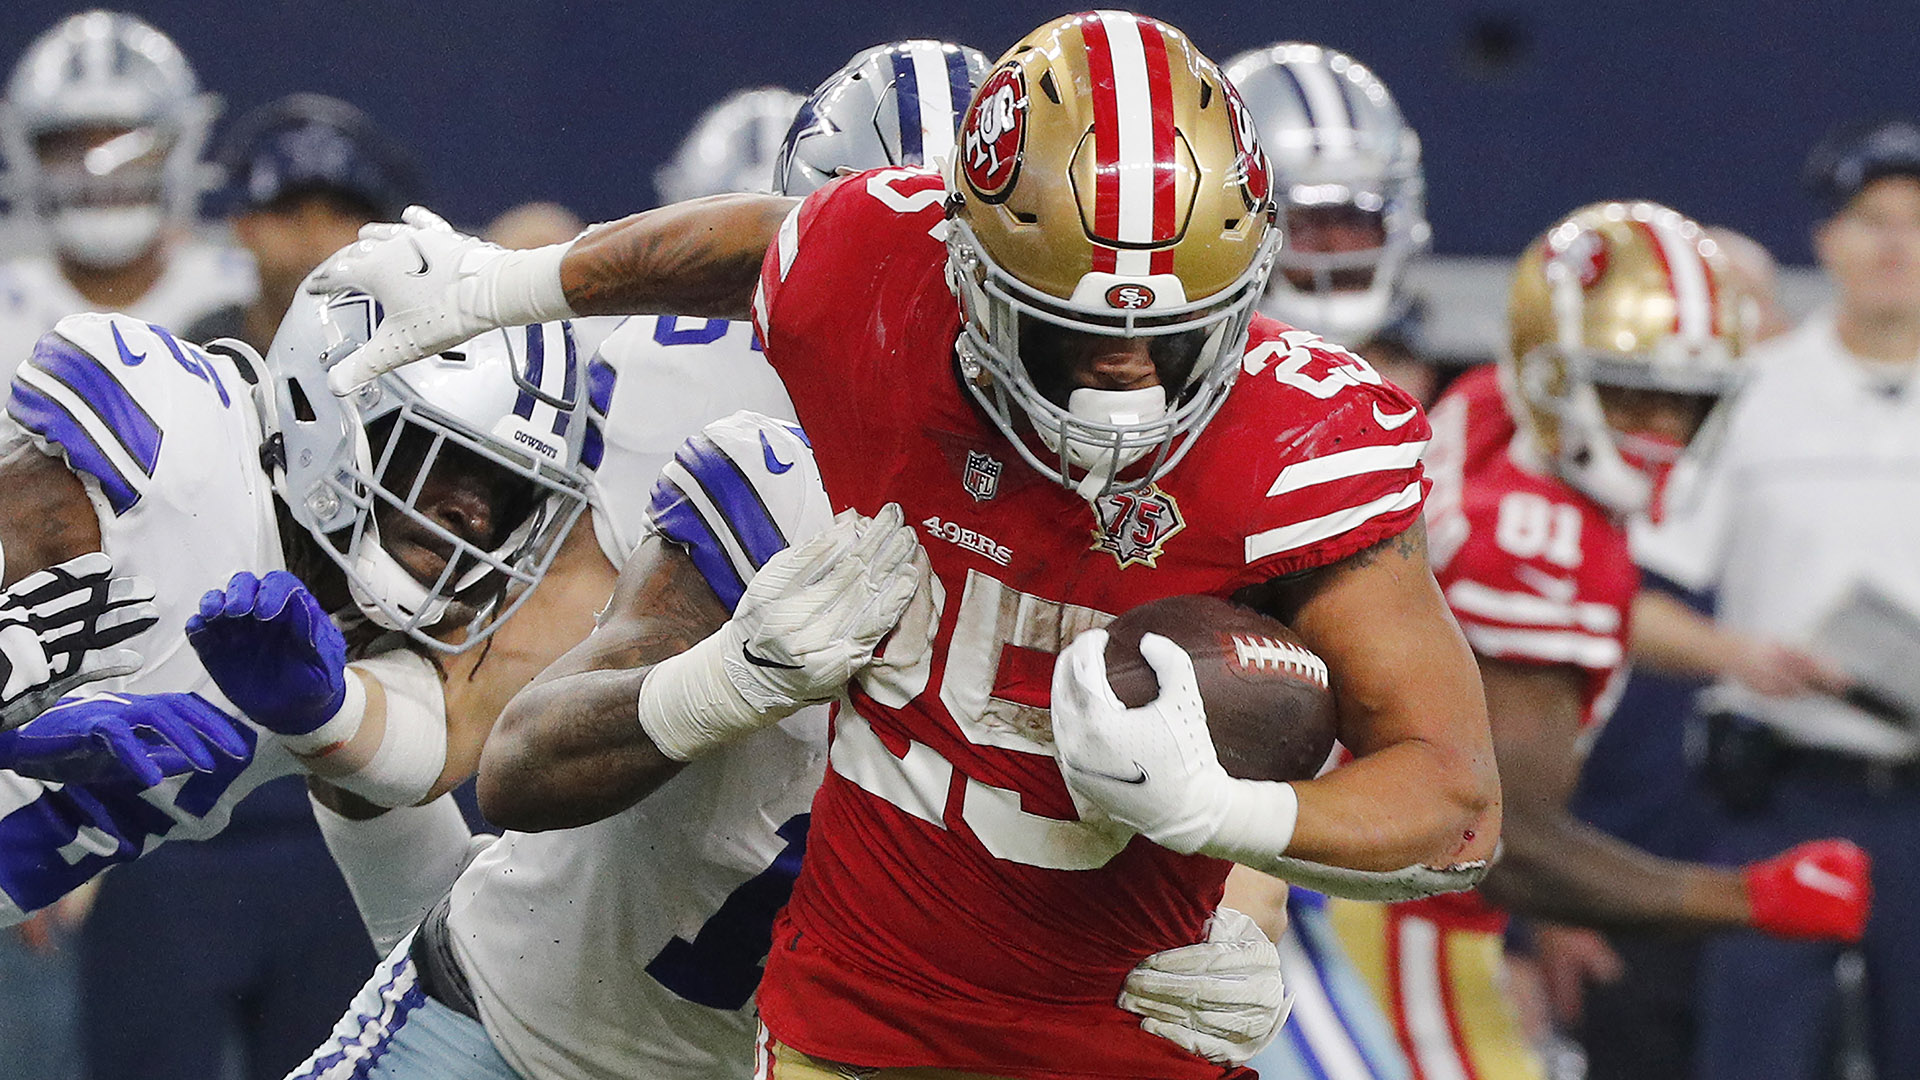 Social Media Reacts to Final Drive of Cowboys-49ers